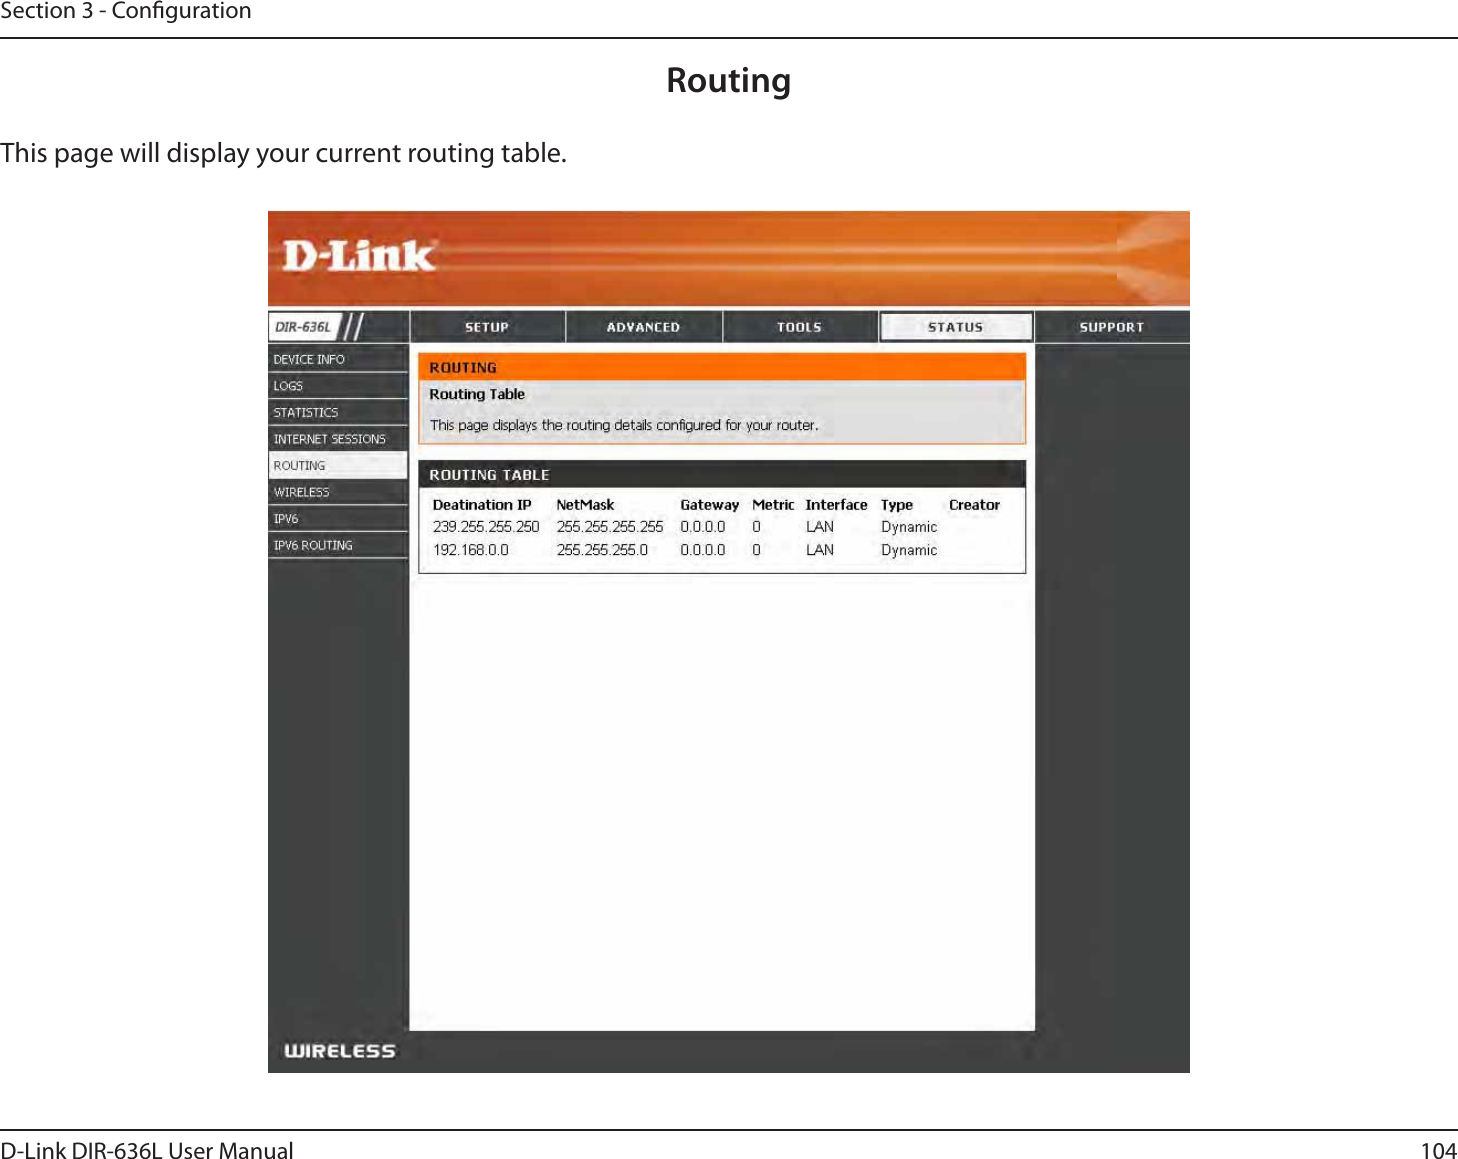 104D-Link DIR-636L User ManualSection 3 - CongurationRoutingThis page will display your current routing table.